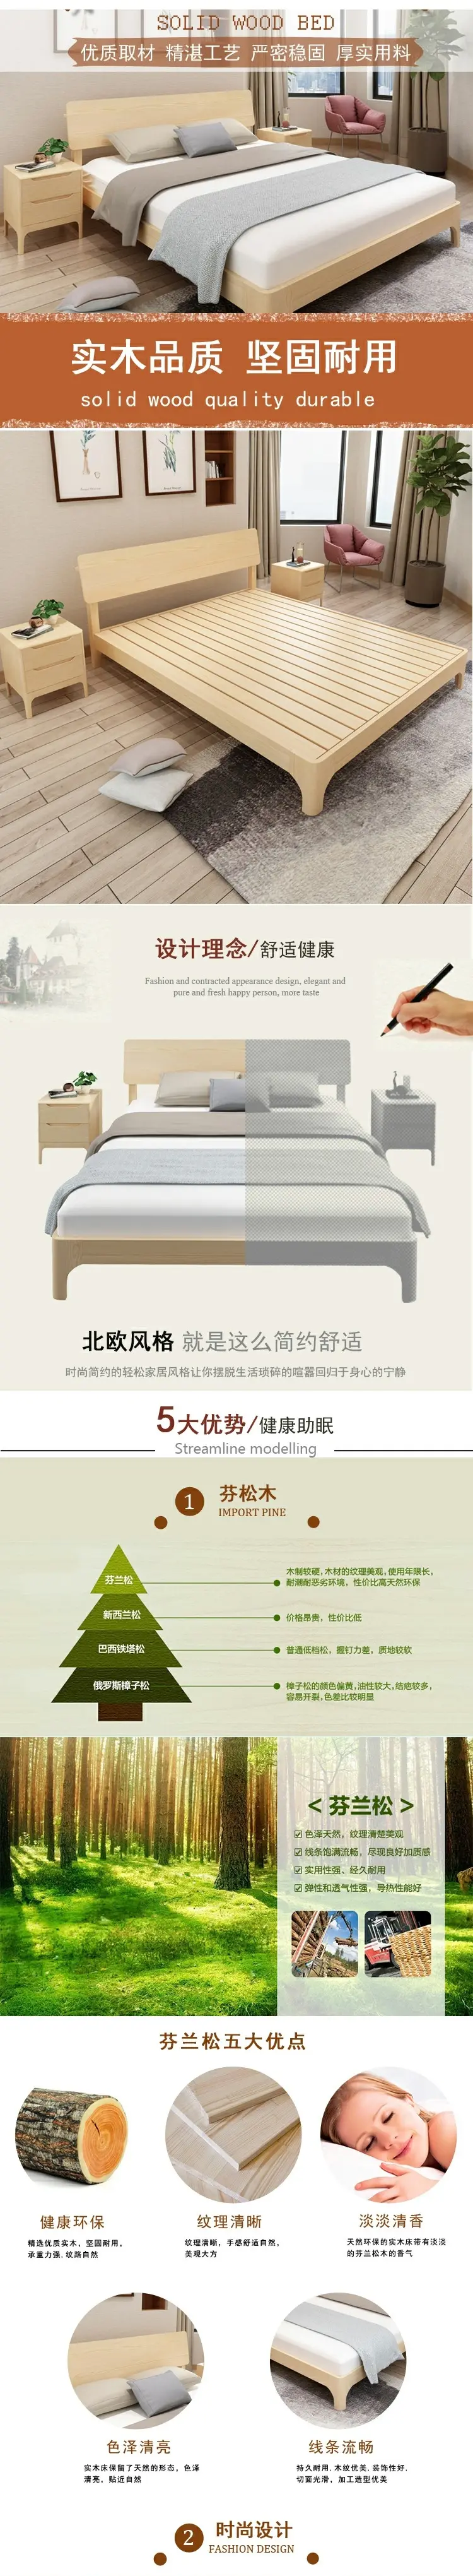 Buy Stock 5 25 Days Nordic Modern Furniture Simple Solid Wood Bed 1 5m Master Bedroom Rubber Wood 1 8m Double Queen Bed Bedroom Furniture 088 On Ezbuy My